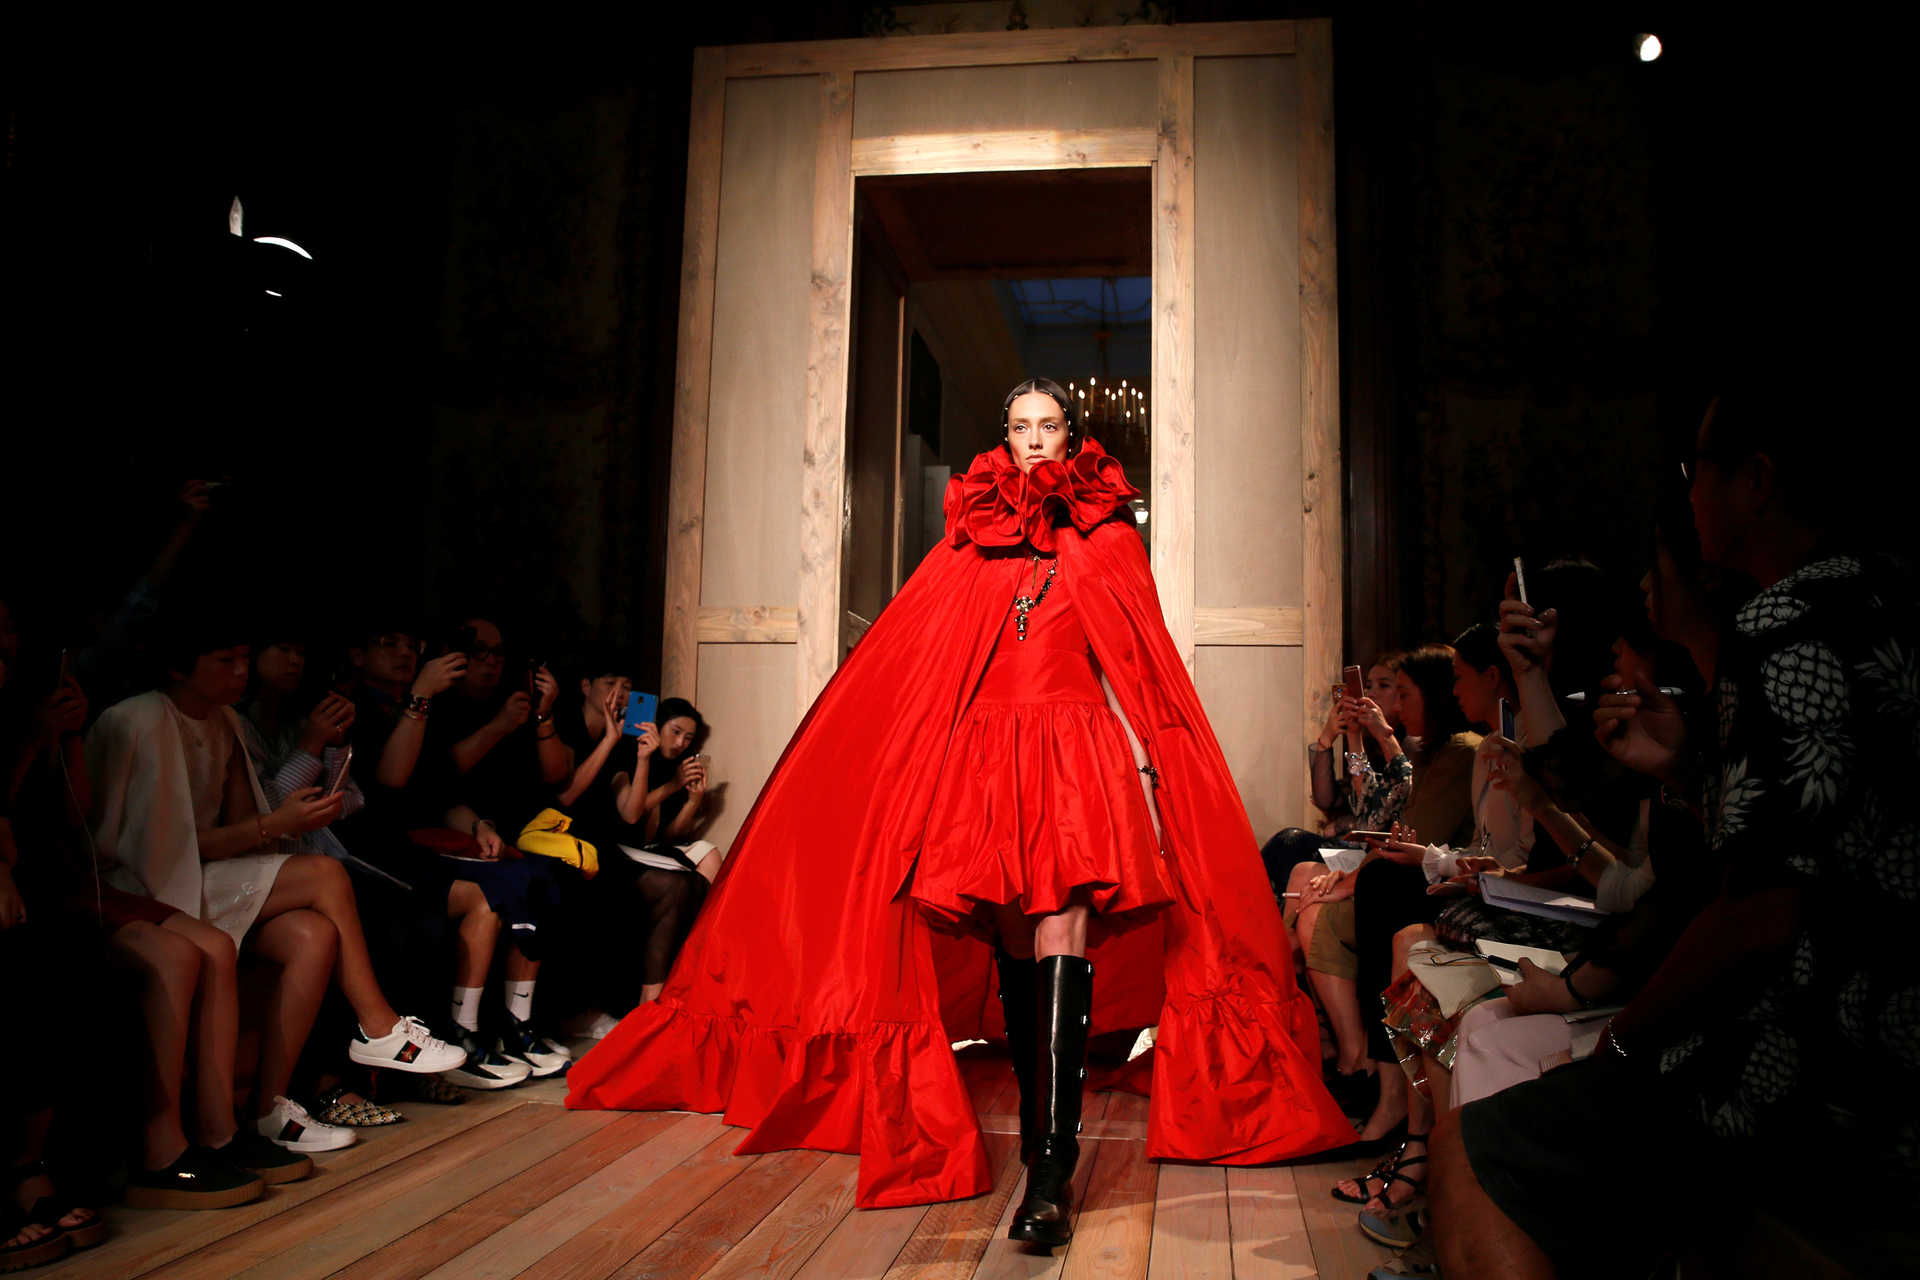 A model presents a creation by Italian designers Maria Grazia Chiuri and Pier Paolo Piccioli as part of their Haute Couture Fall/Winter 2016/2017 collection for fashion house Valentino in Paris